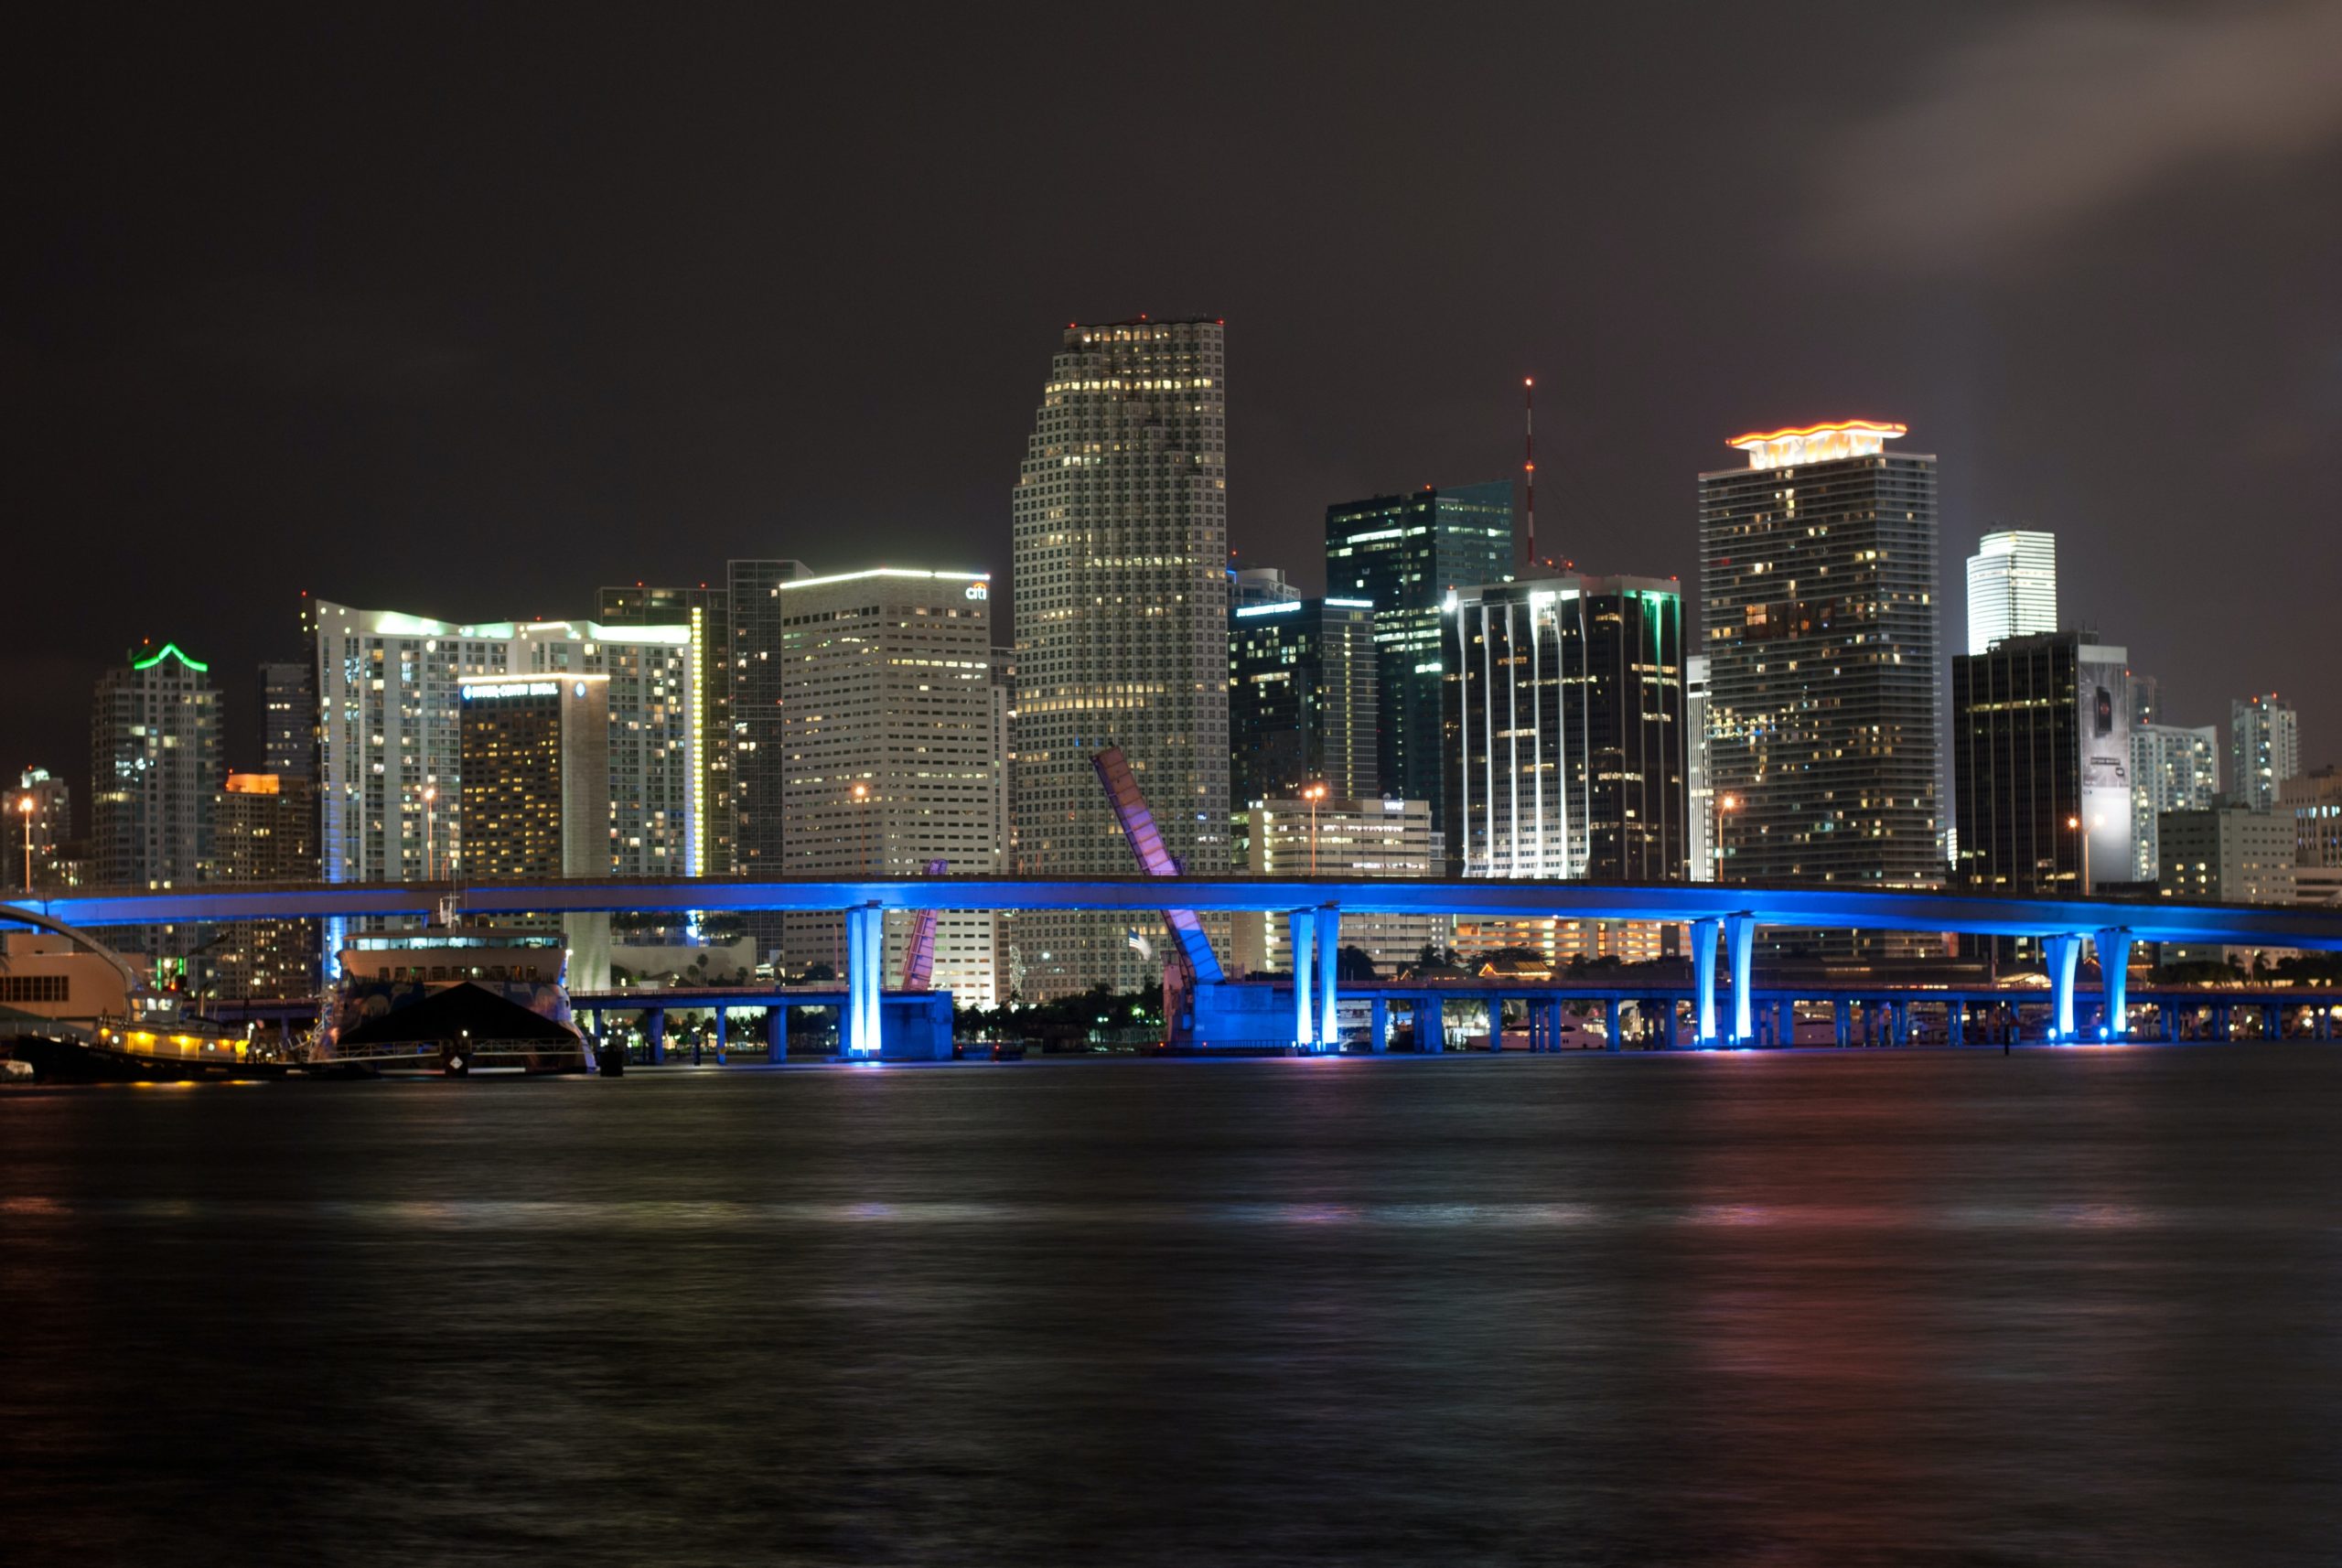 High-rise buildings on the Miami skyline at night.